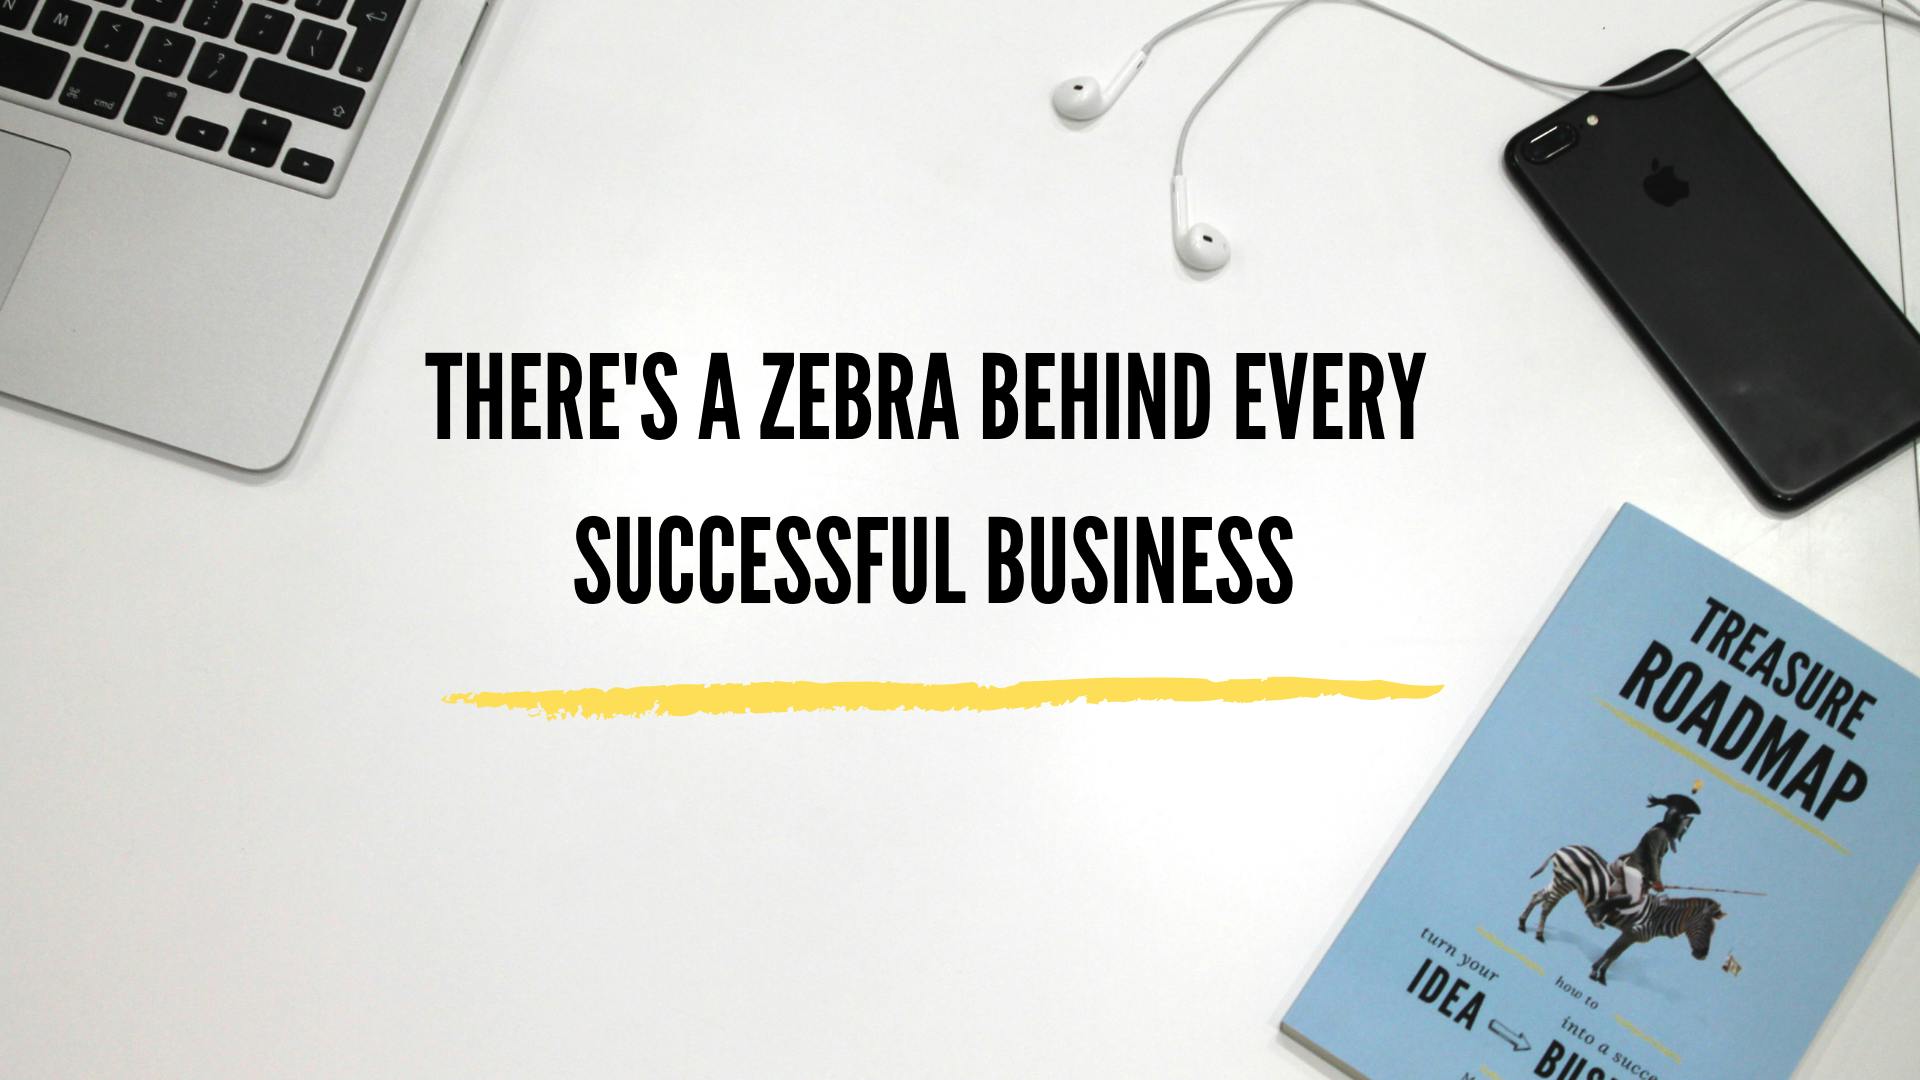 /theres-a-zebra-behind-every-successful-business-a3a28e264af1 feature image